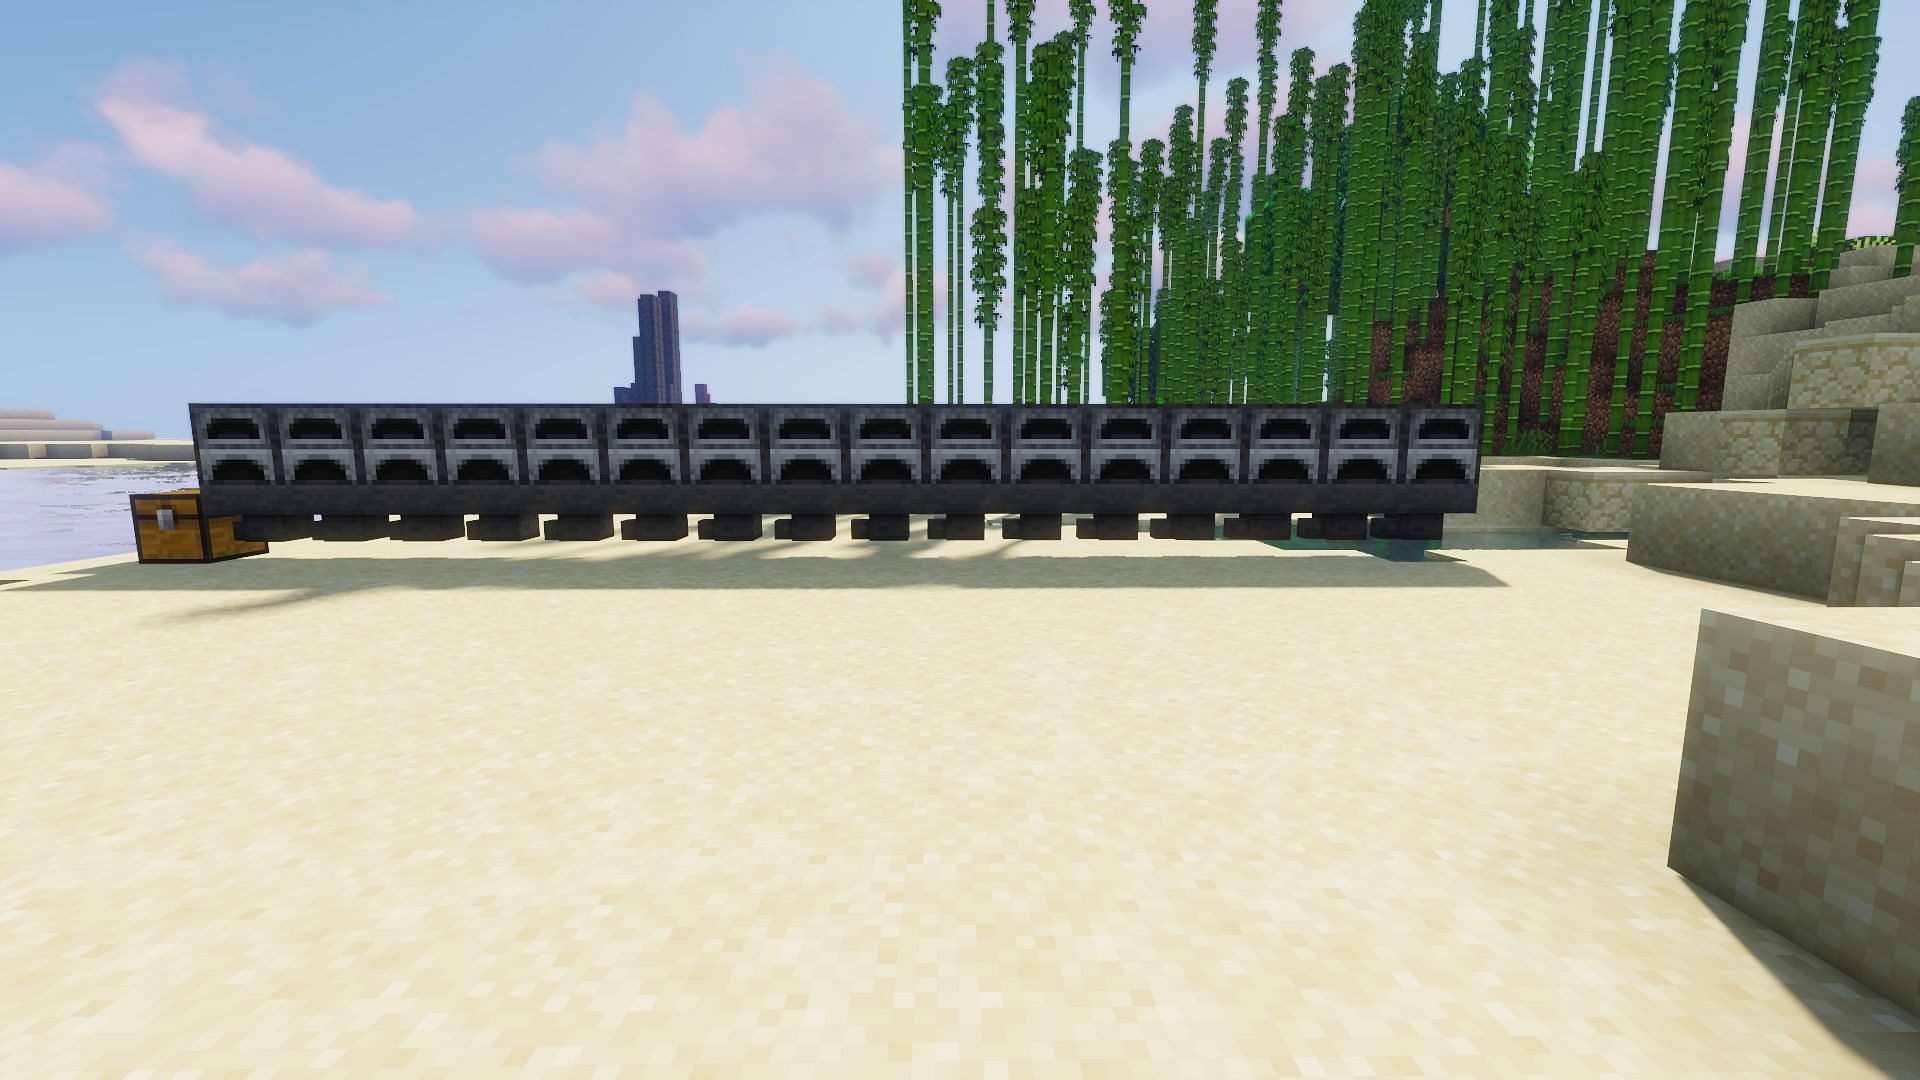 The furnaces added to the smelter (Image via Minecraft)